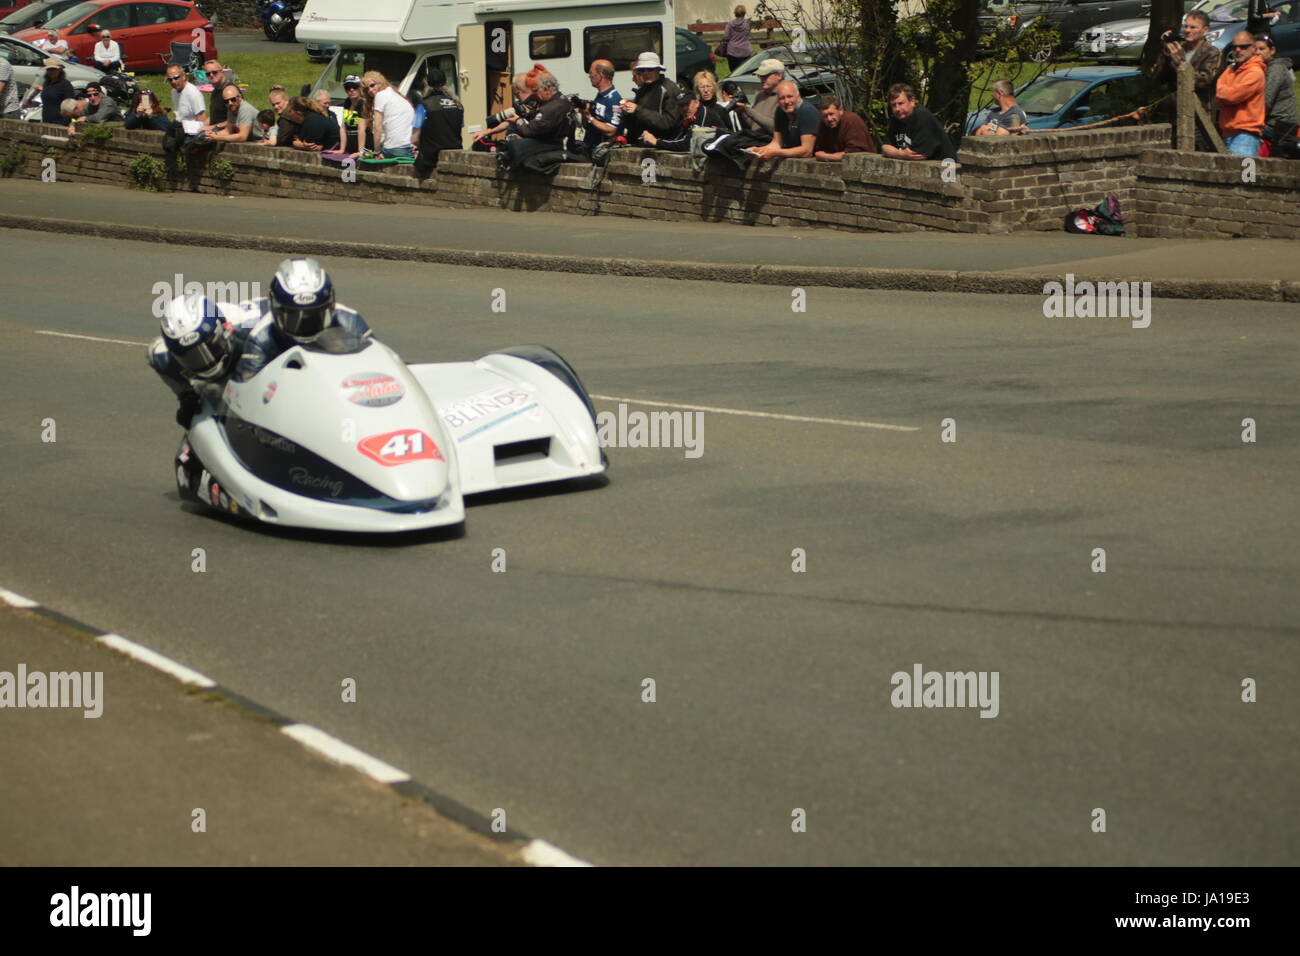 Isle of Man TT Races, Sidecar Qualifying Practice Race, Saturday 3 June 2017. Sidecar qualifying session. Number 41, Kevin Thornton and Dave Dean on a 600cc LCR Suzuki of the Thornton Racing  team from Liverpool, UK.Credit: Eclectic Art and Photography/Alamy Live News. Stock Photo